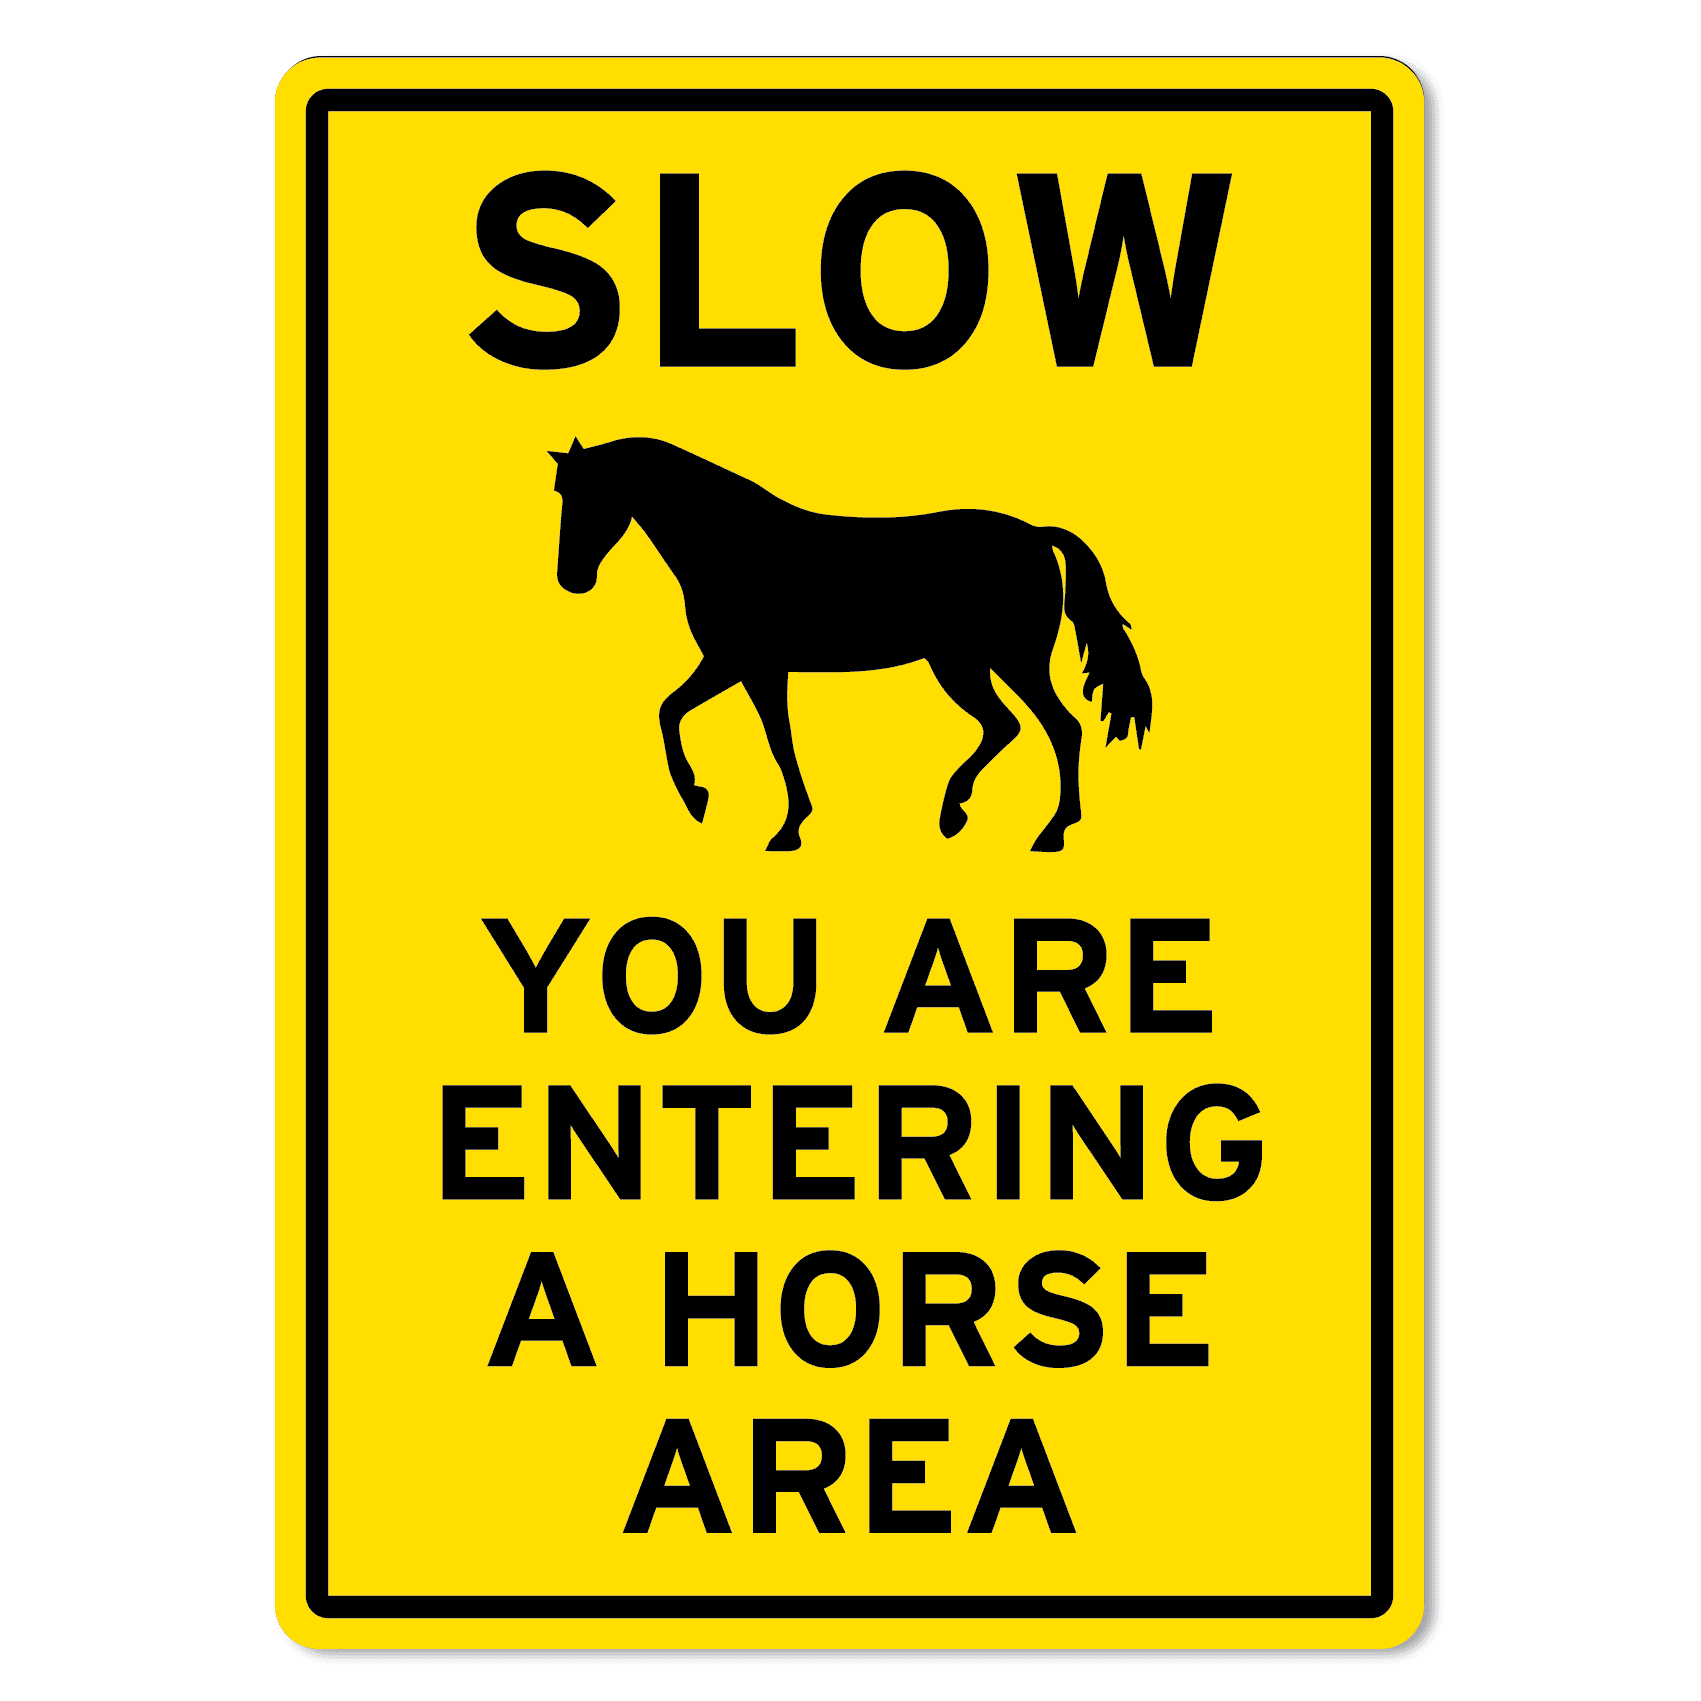 FA51_Slow-You-Are-Entering-A-Horse-Area.png